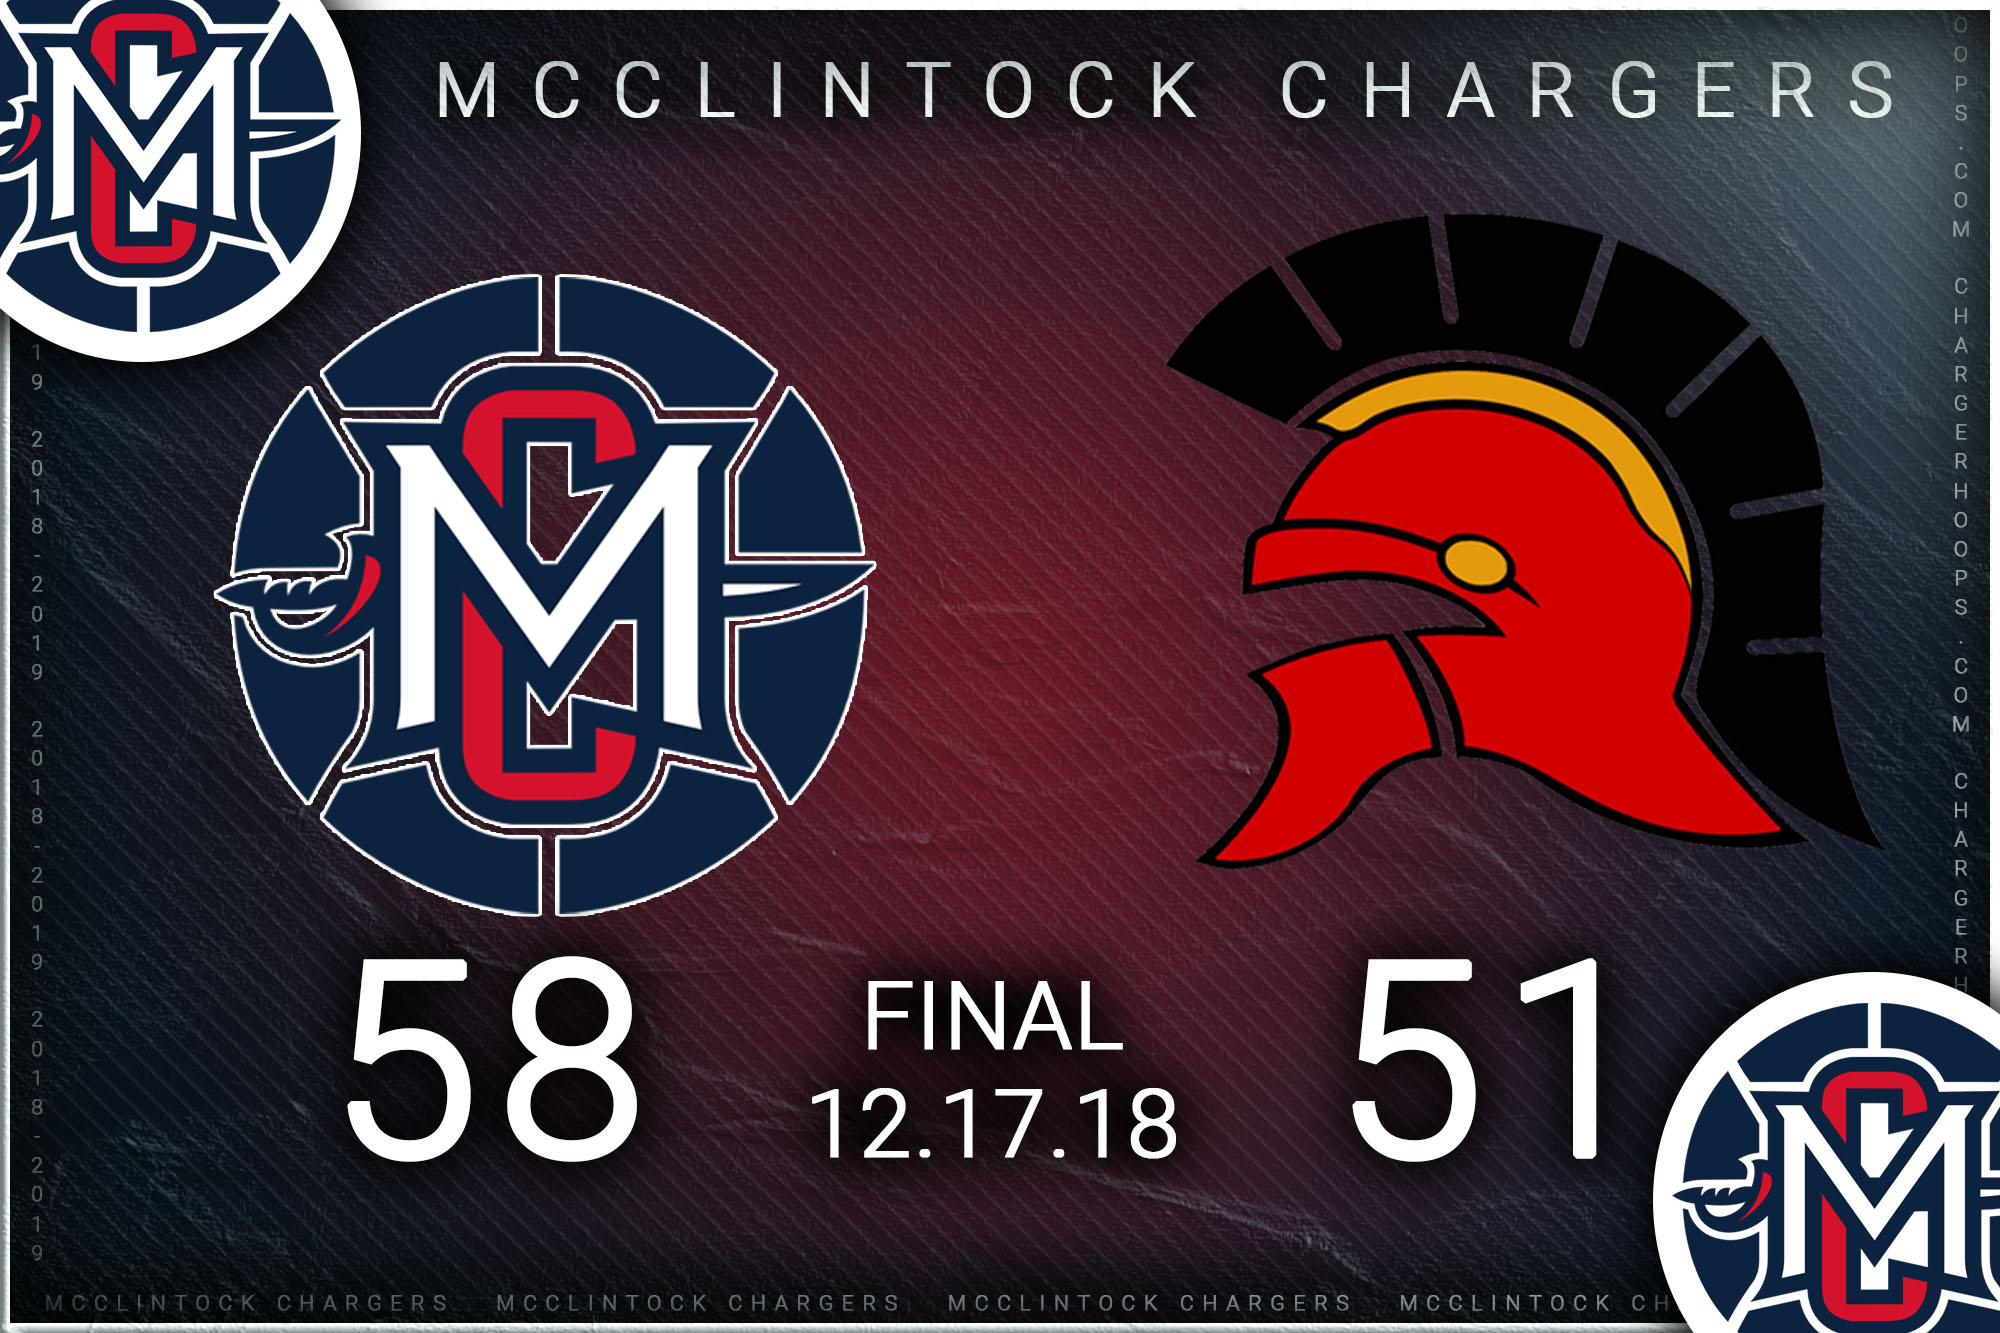 McClintock Chargers vs. Paradise Valley